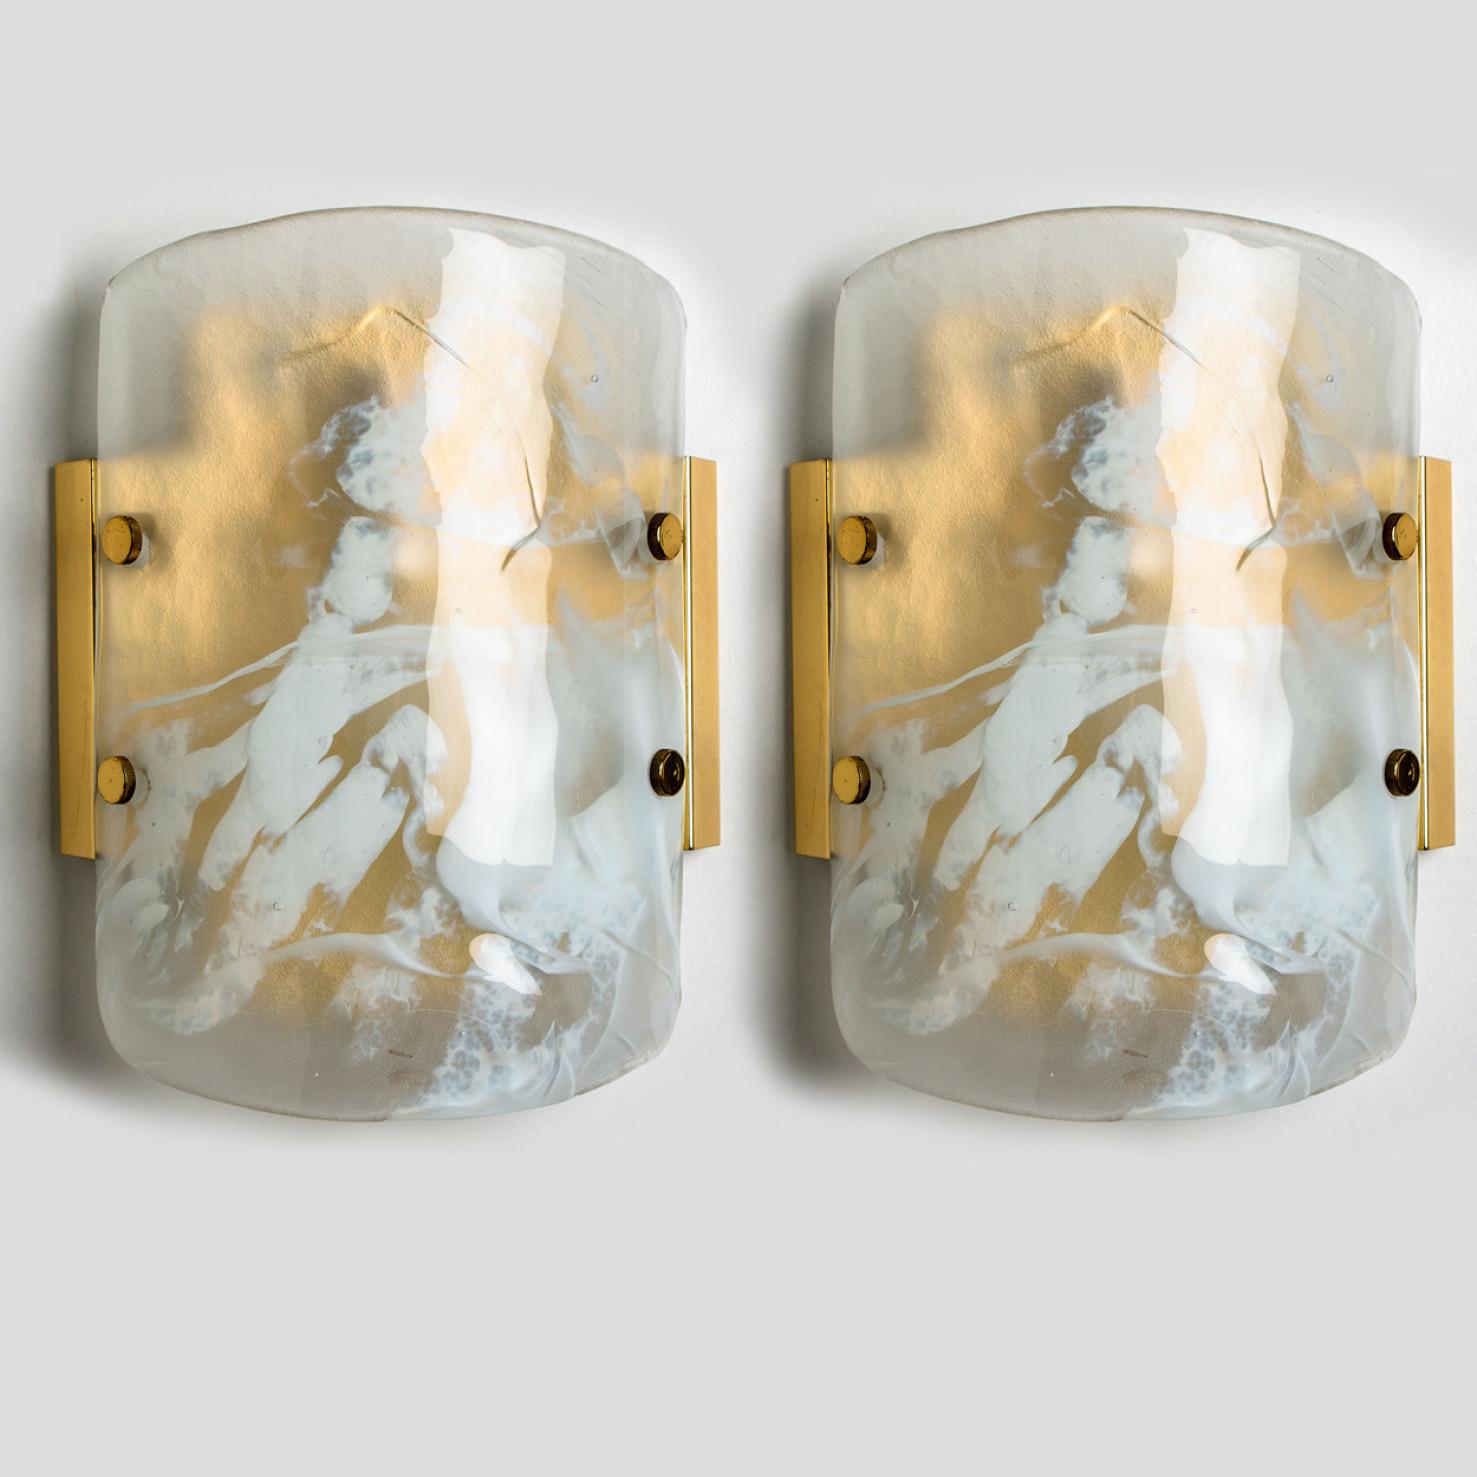 Other Hillebrand Marble Murano Glass Wall Light Fixtures, 1960s For Sale